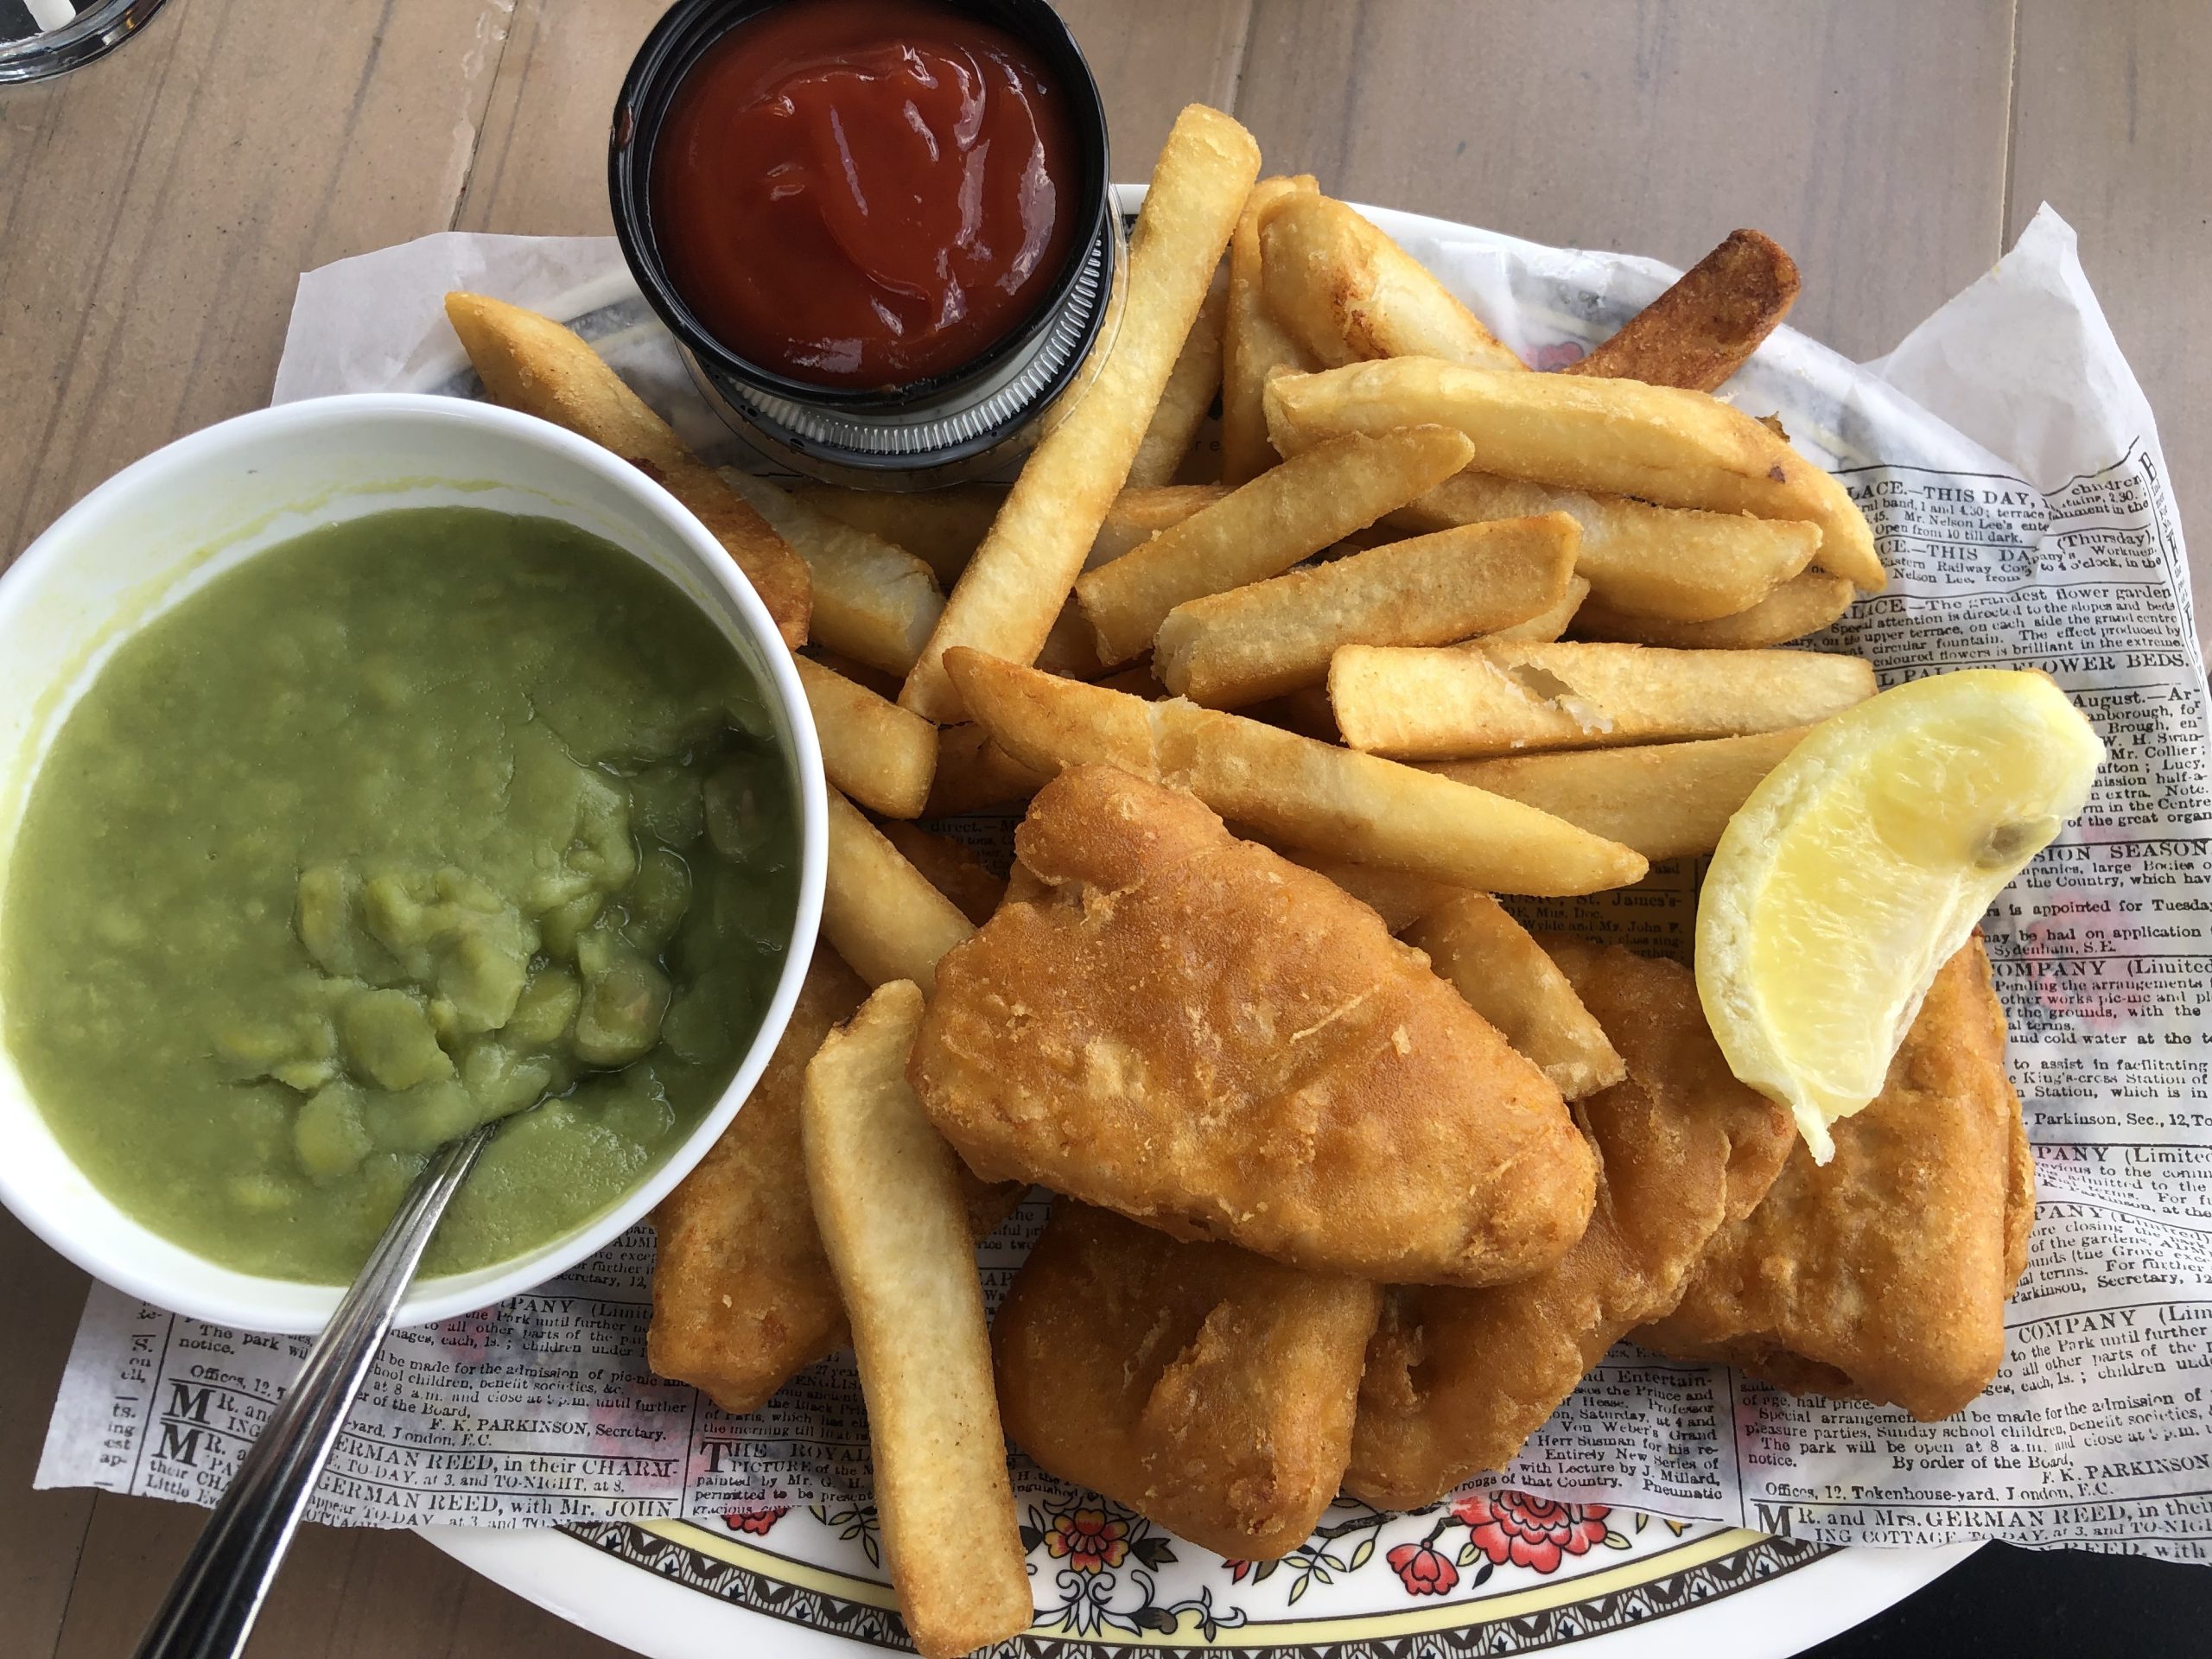 Vegan fish and chips from Disney